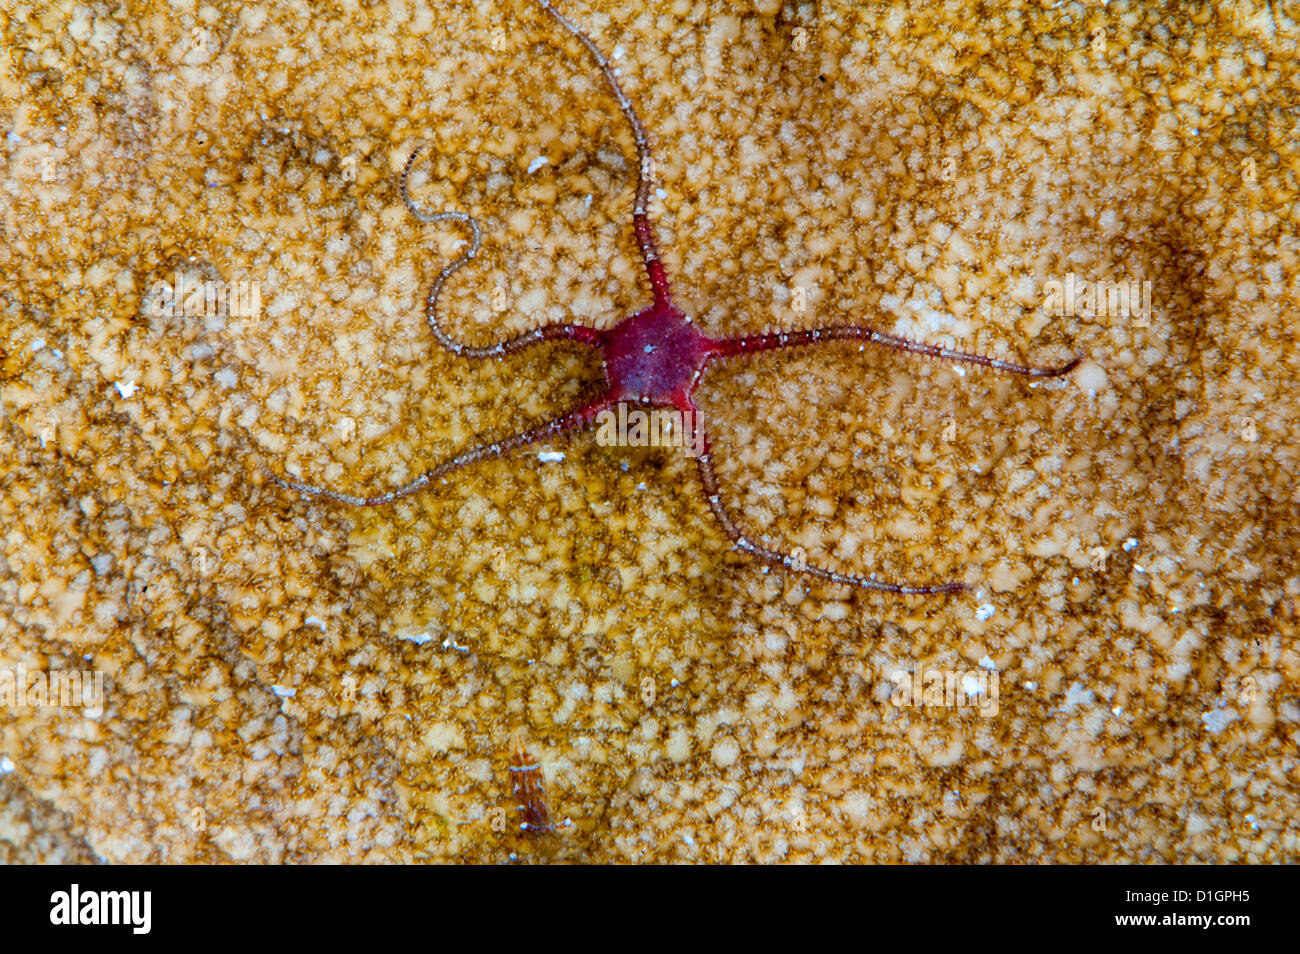 Brittle star fish (Ophiothrix sp.), Sulawesi, Indonesia, Southeast Asia, Asia Stock Photo